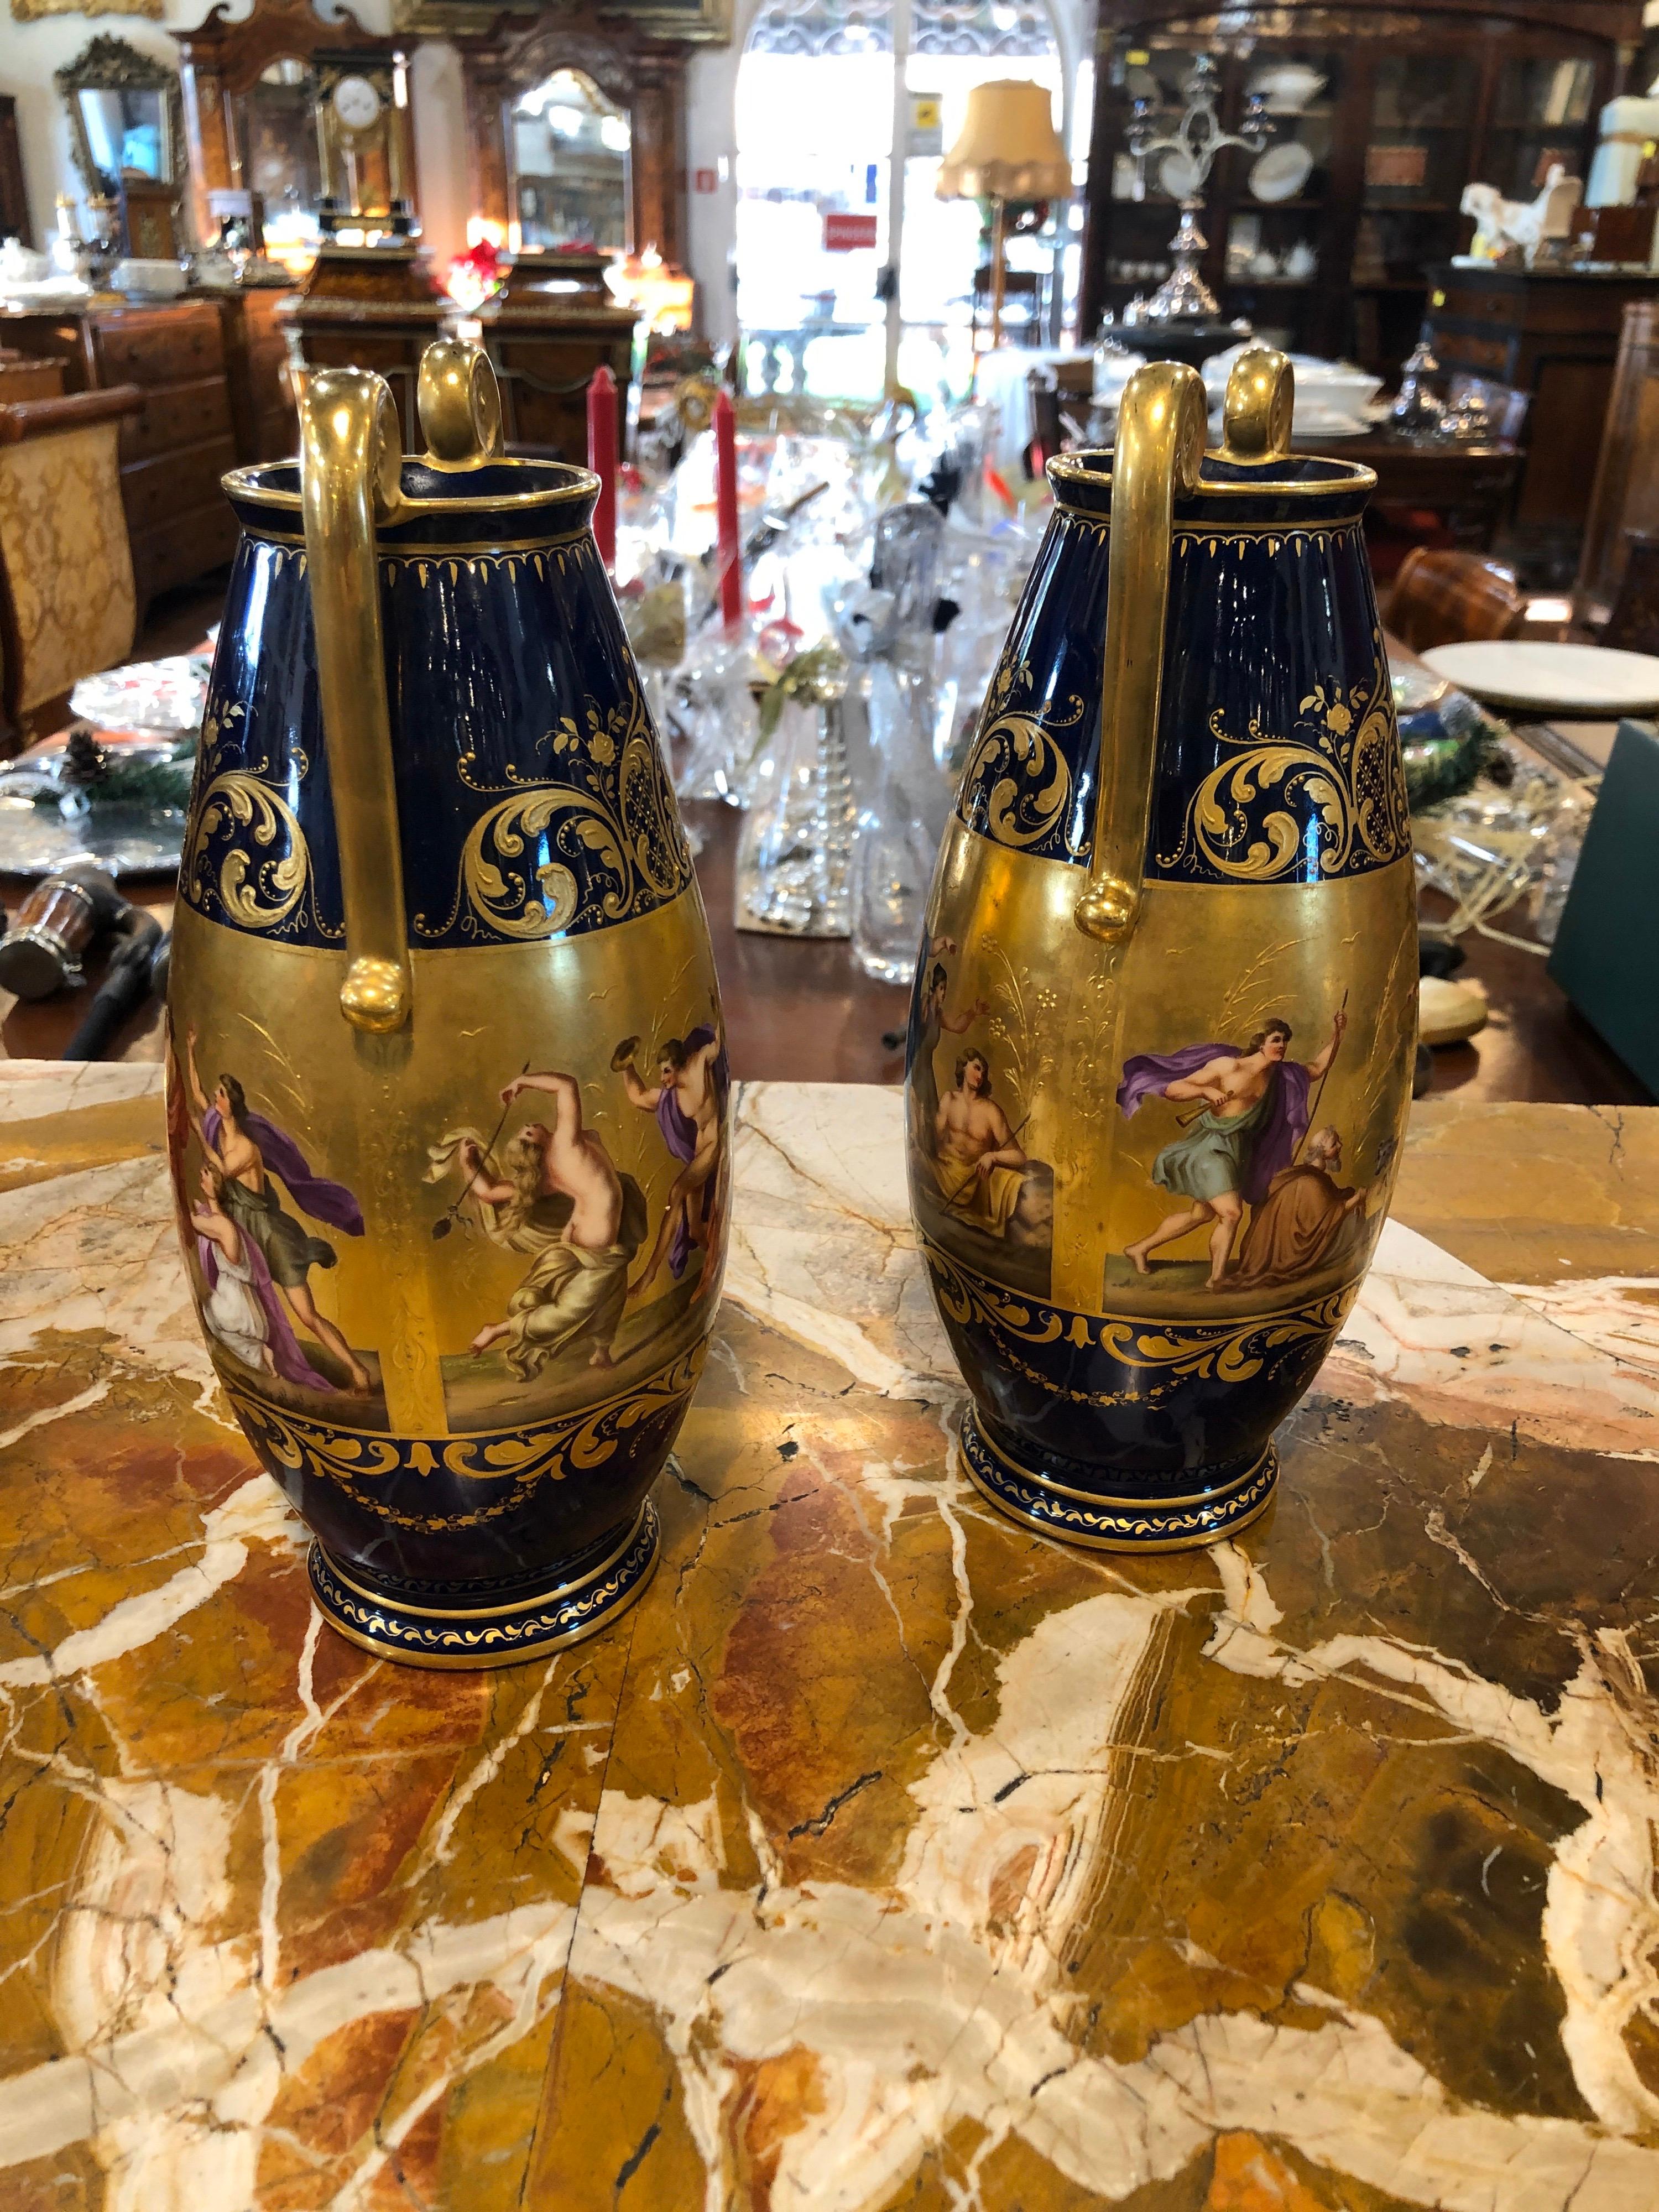 Pair of Viennese vases, in gold and blue, depicting Apollo and shepherd of arcadia. Fine workmanship in gold and well-painted figures, circa 1860.